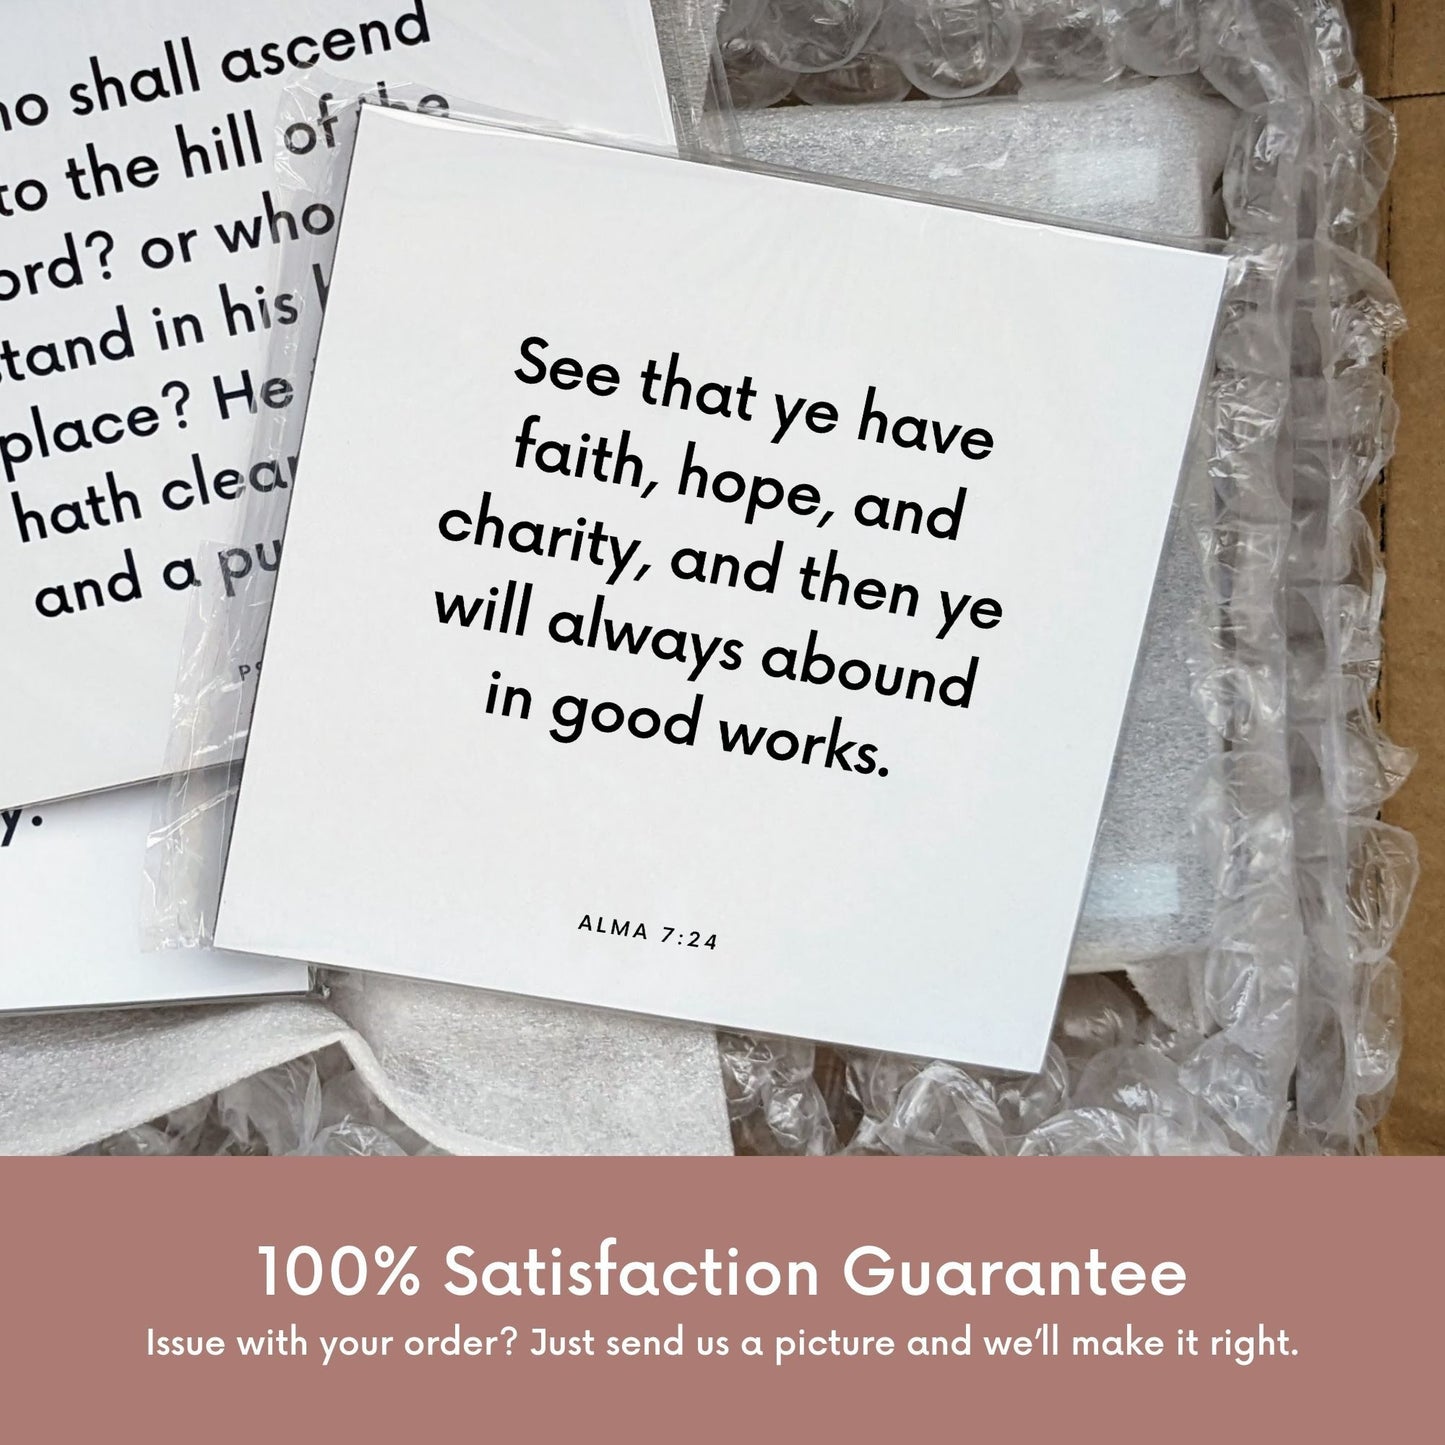 Shipping materials for scripture tile of Alma 7:24 - "See that ye have faith, hope, and charity"